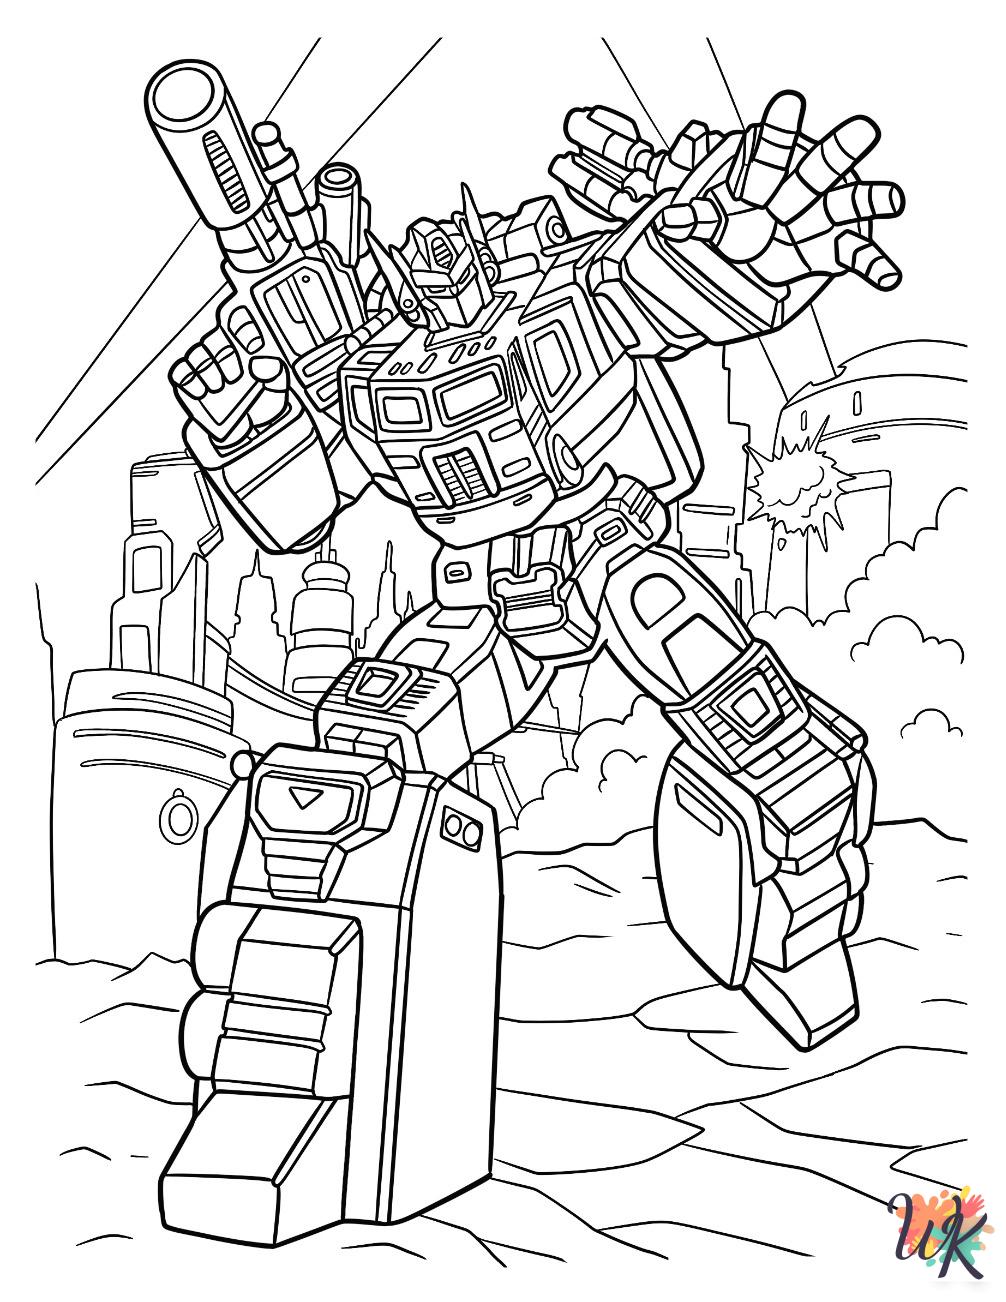 Optimus Prime coloring pages for adults easy